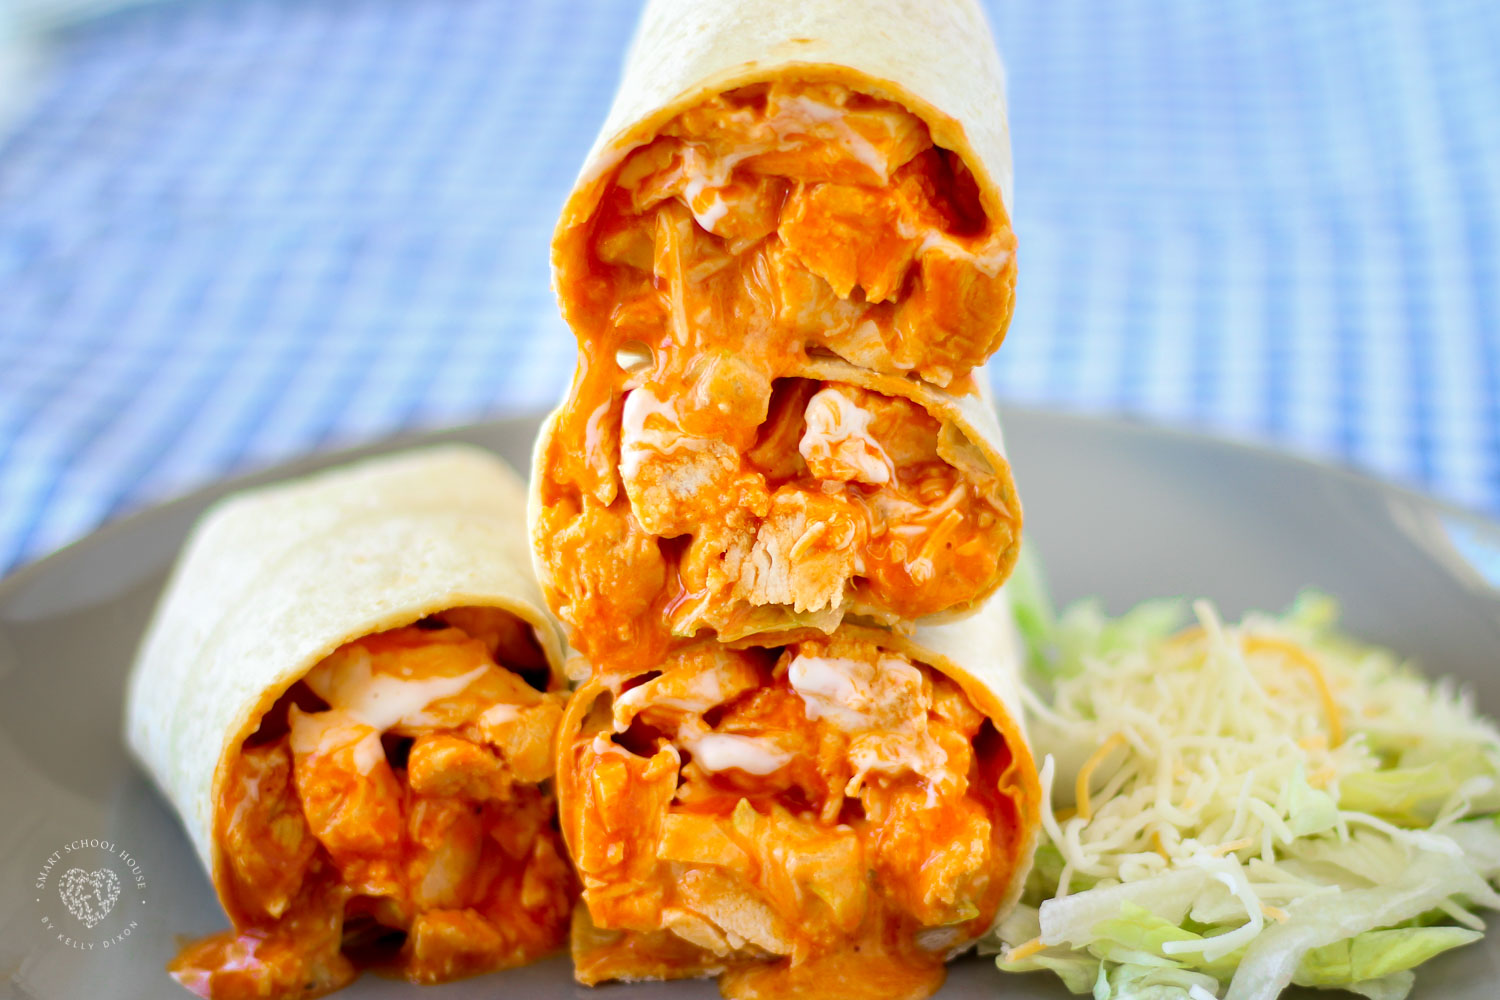 Drizzled with delicious ranch dressing and stuffed with shredded lettuce, these Buffalo Chicken Wraps are bursting with flavor and made in just 30 minutes!